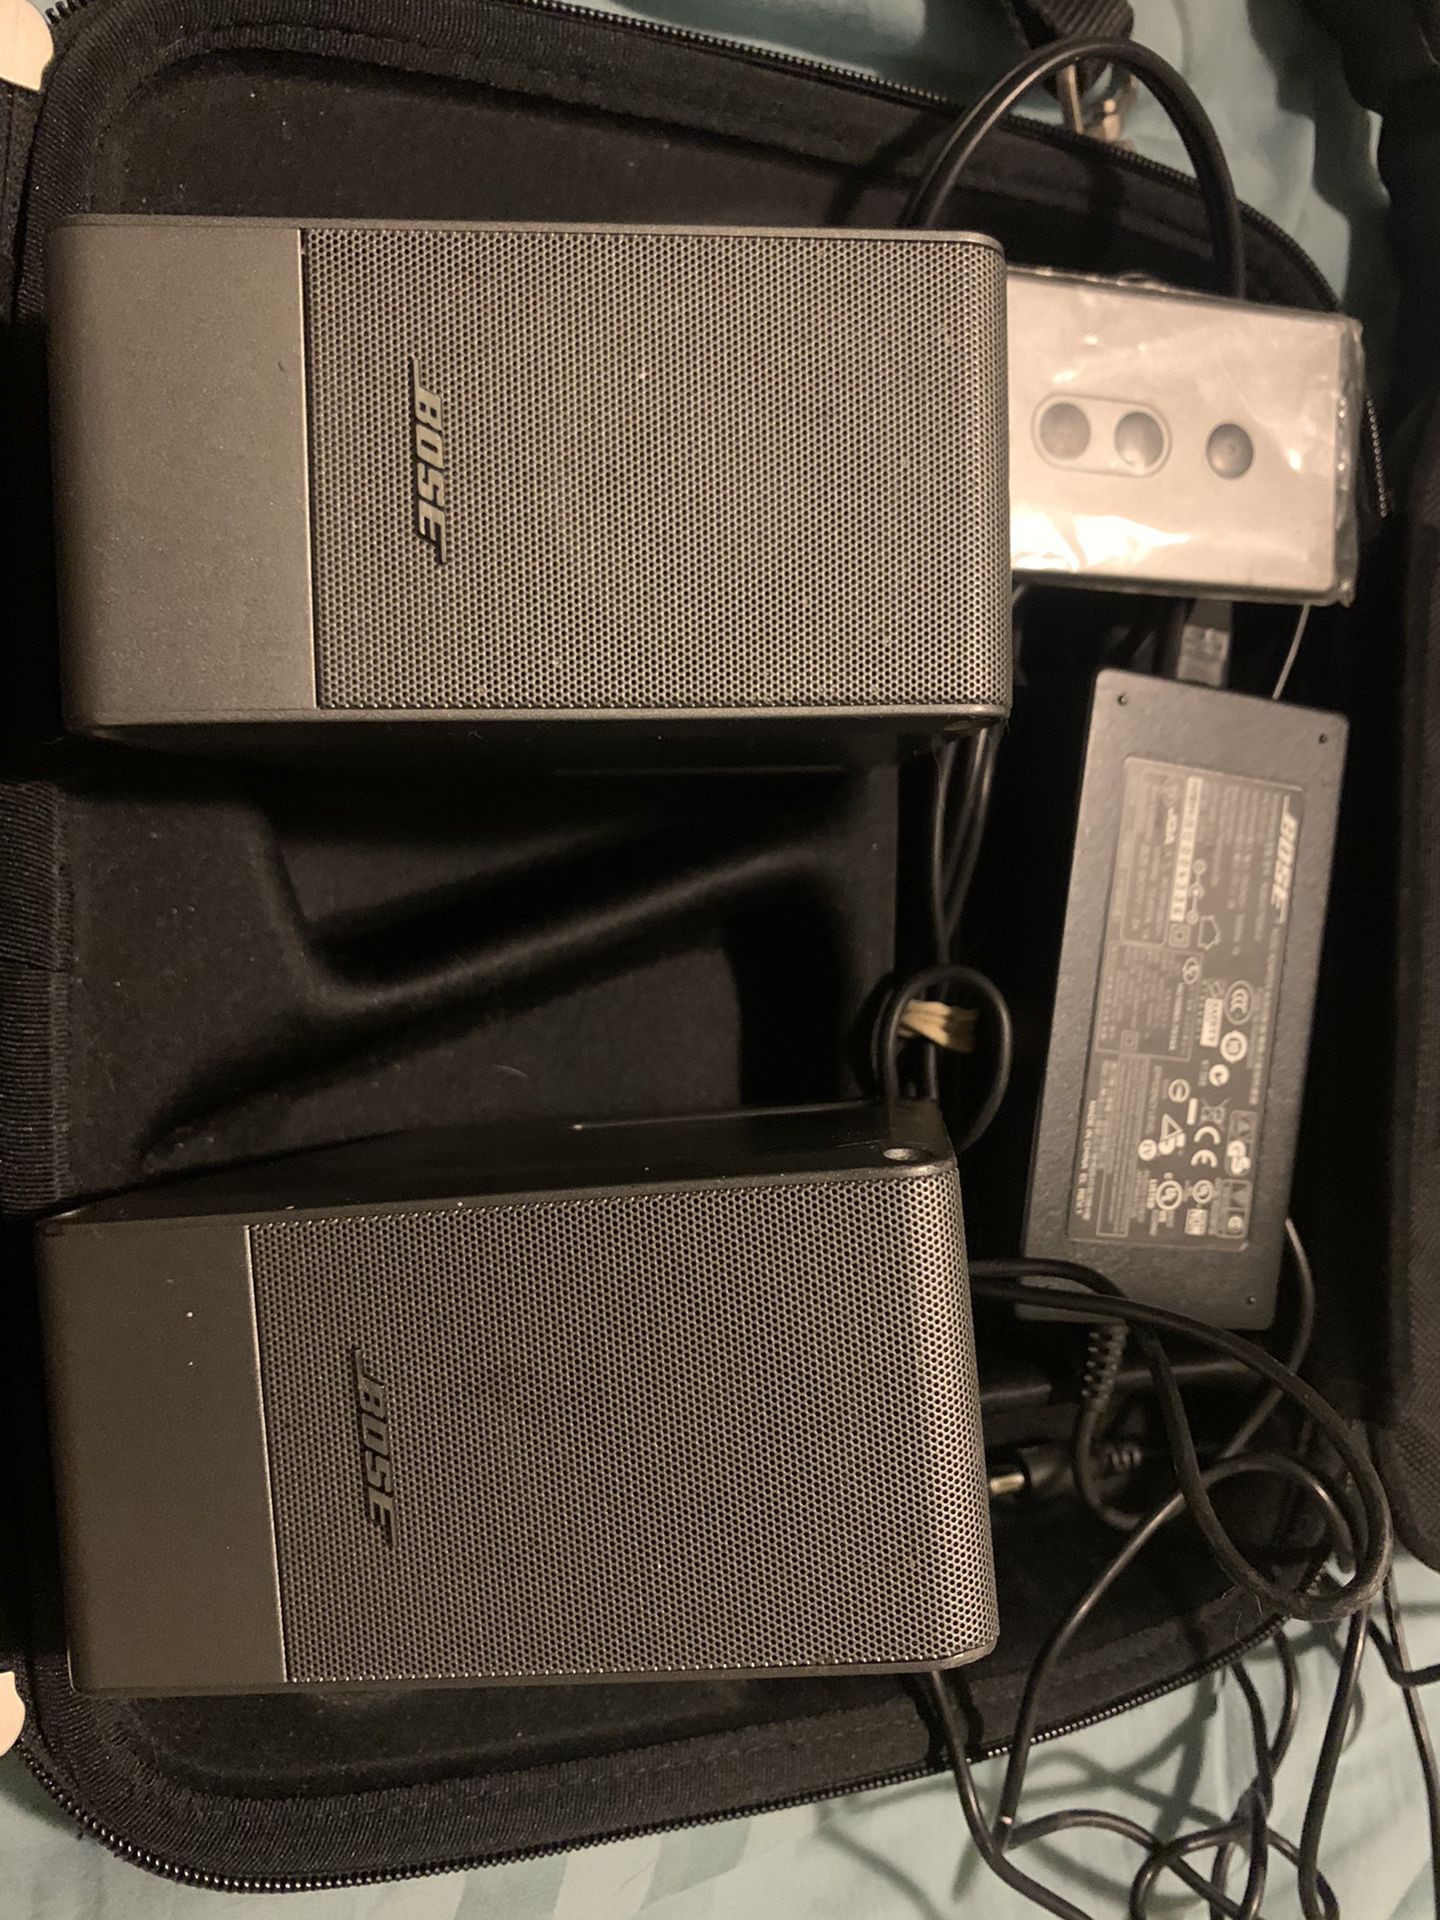 Bose Computer MusicMonitor Speakers with Remote and Carrying Case